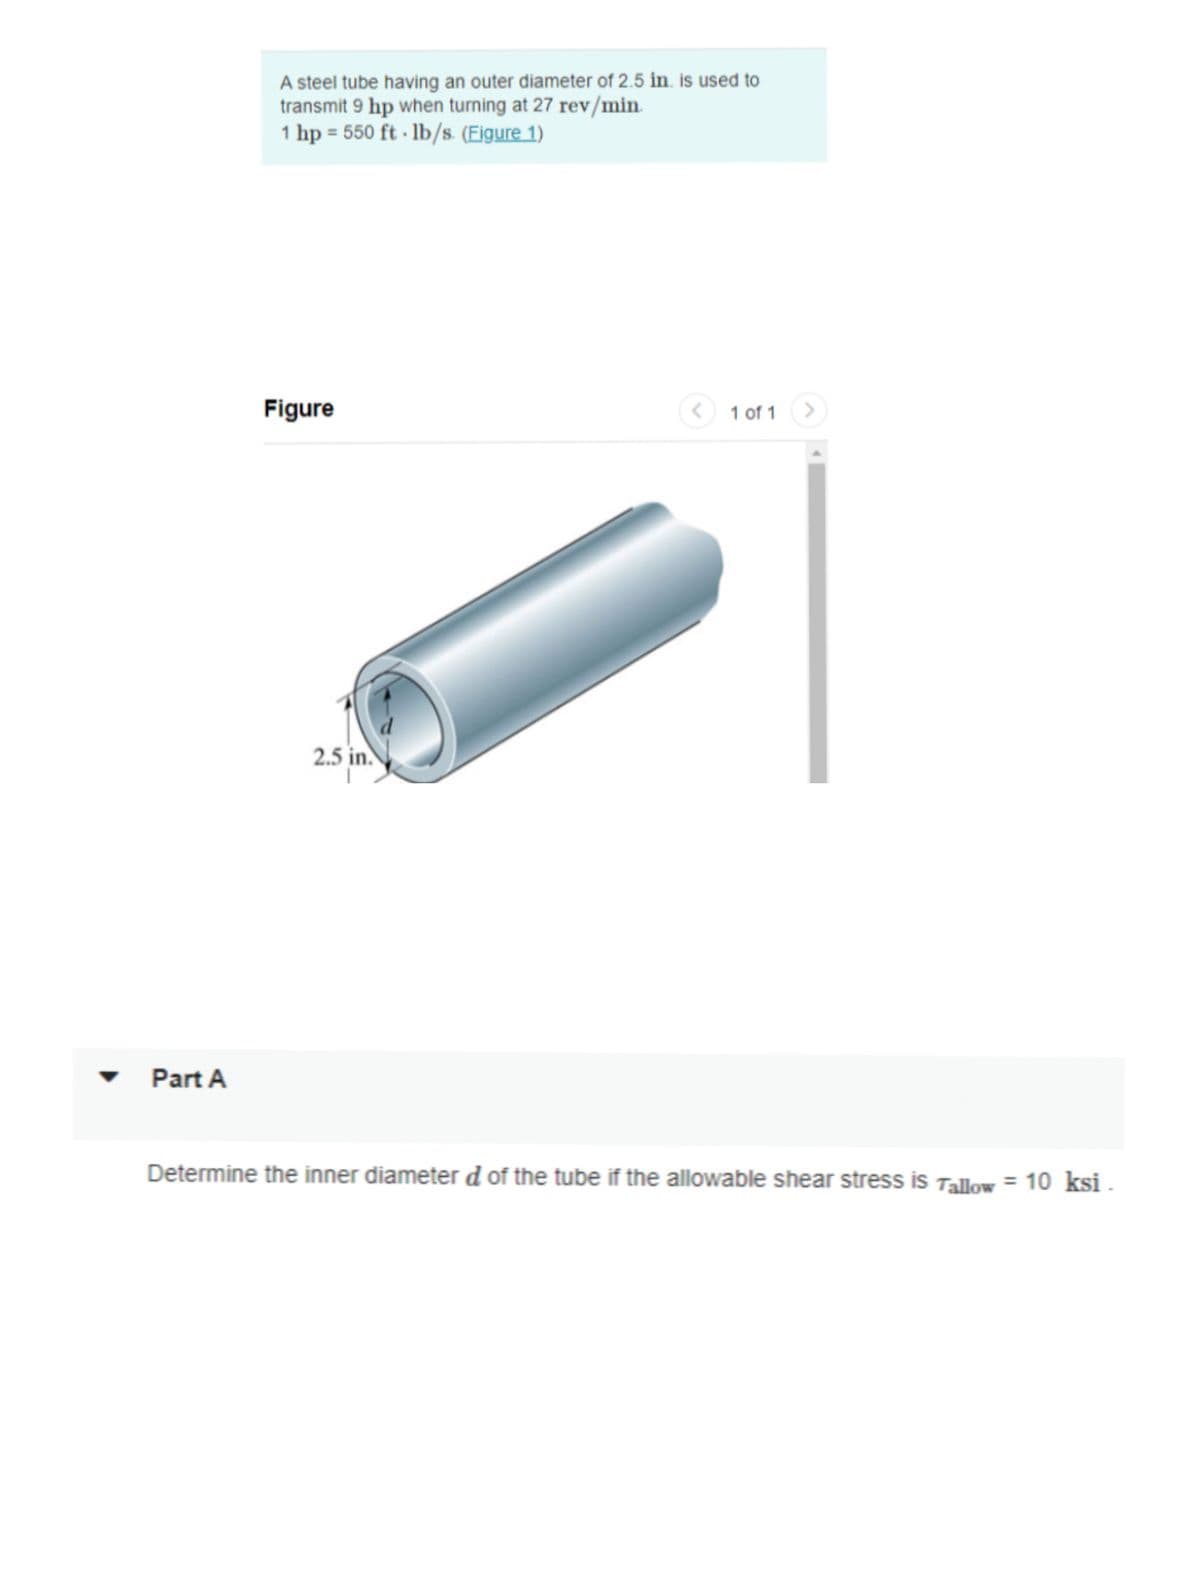 Part A
A steel tube having an outer diameter of 2.5 in. is used to
transmit 9 hp when turning at 27 rev/min.
1 hp = 550 ft-lb/s. (Figure 1)
Figure
2.5 in.
< 1 of 1
>
Determine the inner diameter d of the tube if the allowable shear stress is Tallow = 10 ksi.